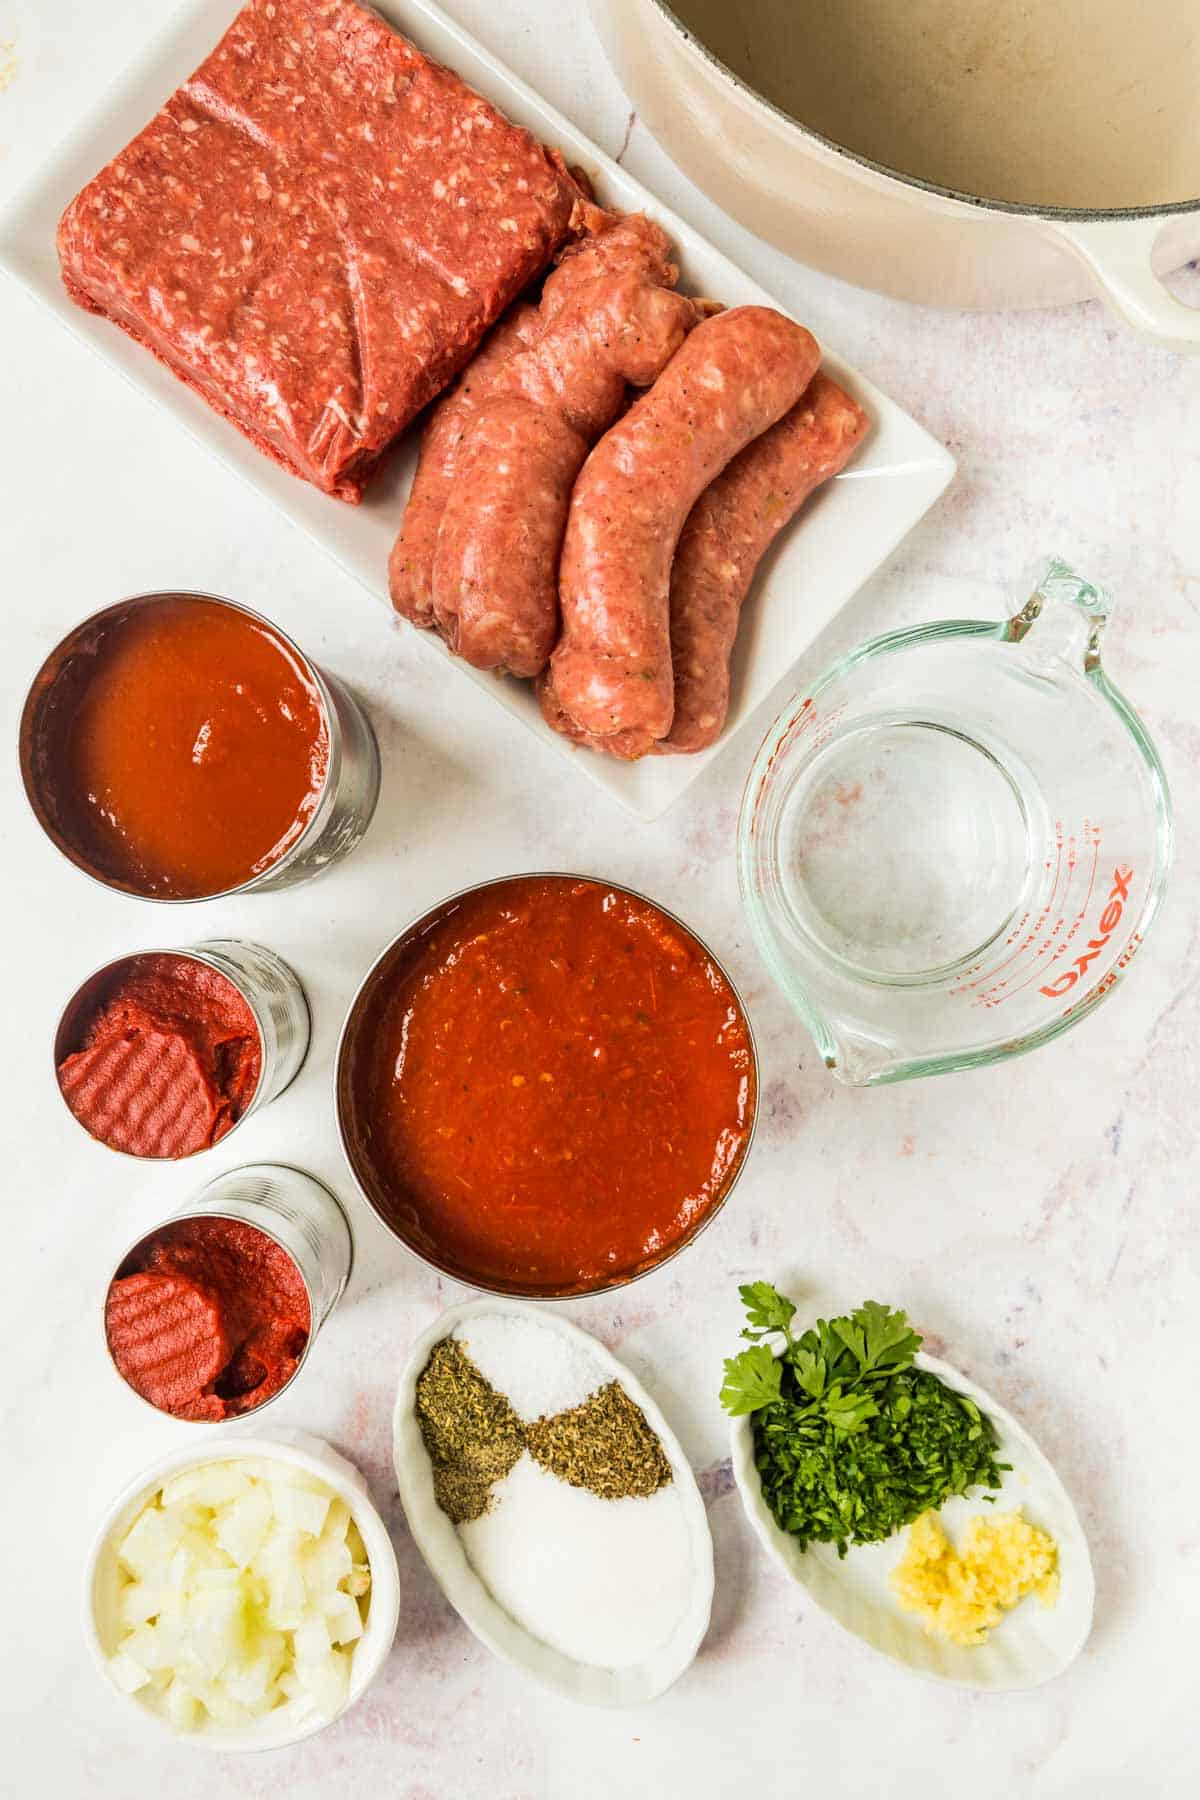 All of the ingredients to make meat sauce for lasagna in bowls, dishes, and cans on a marble countertop.